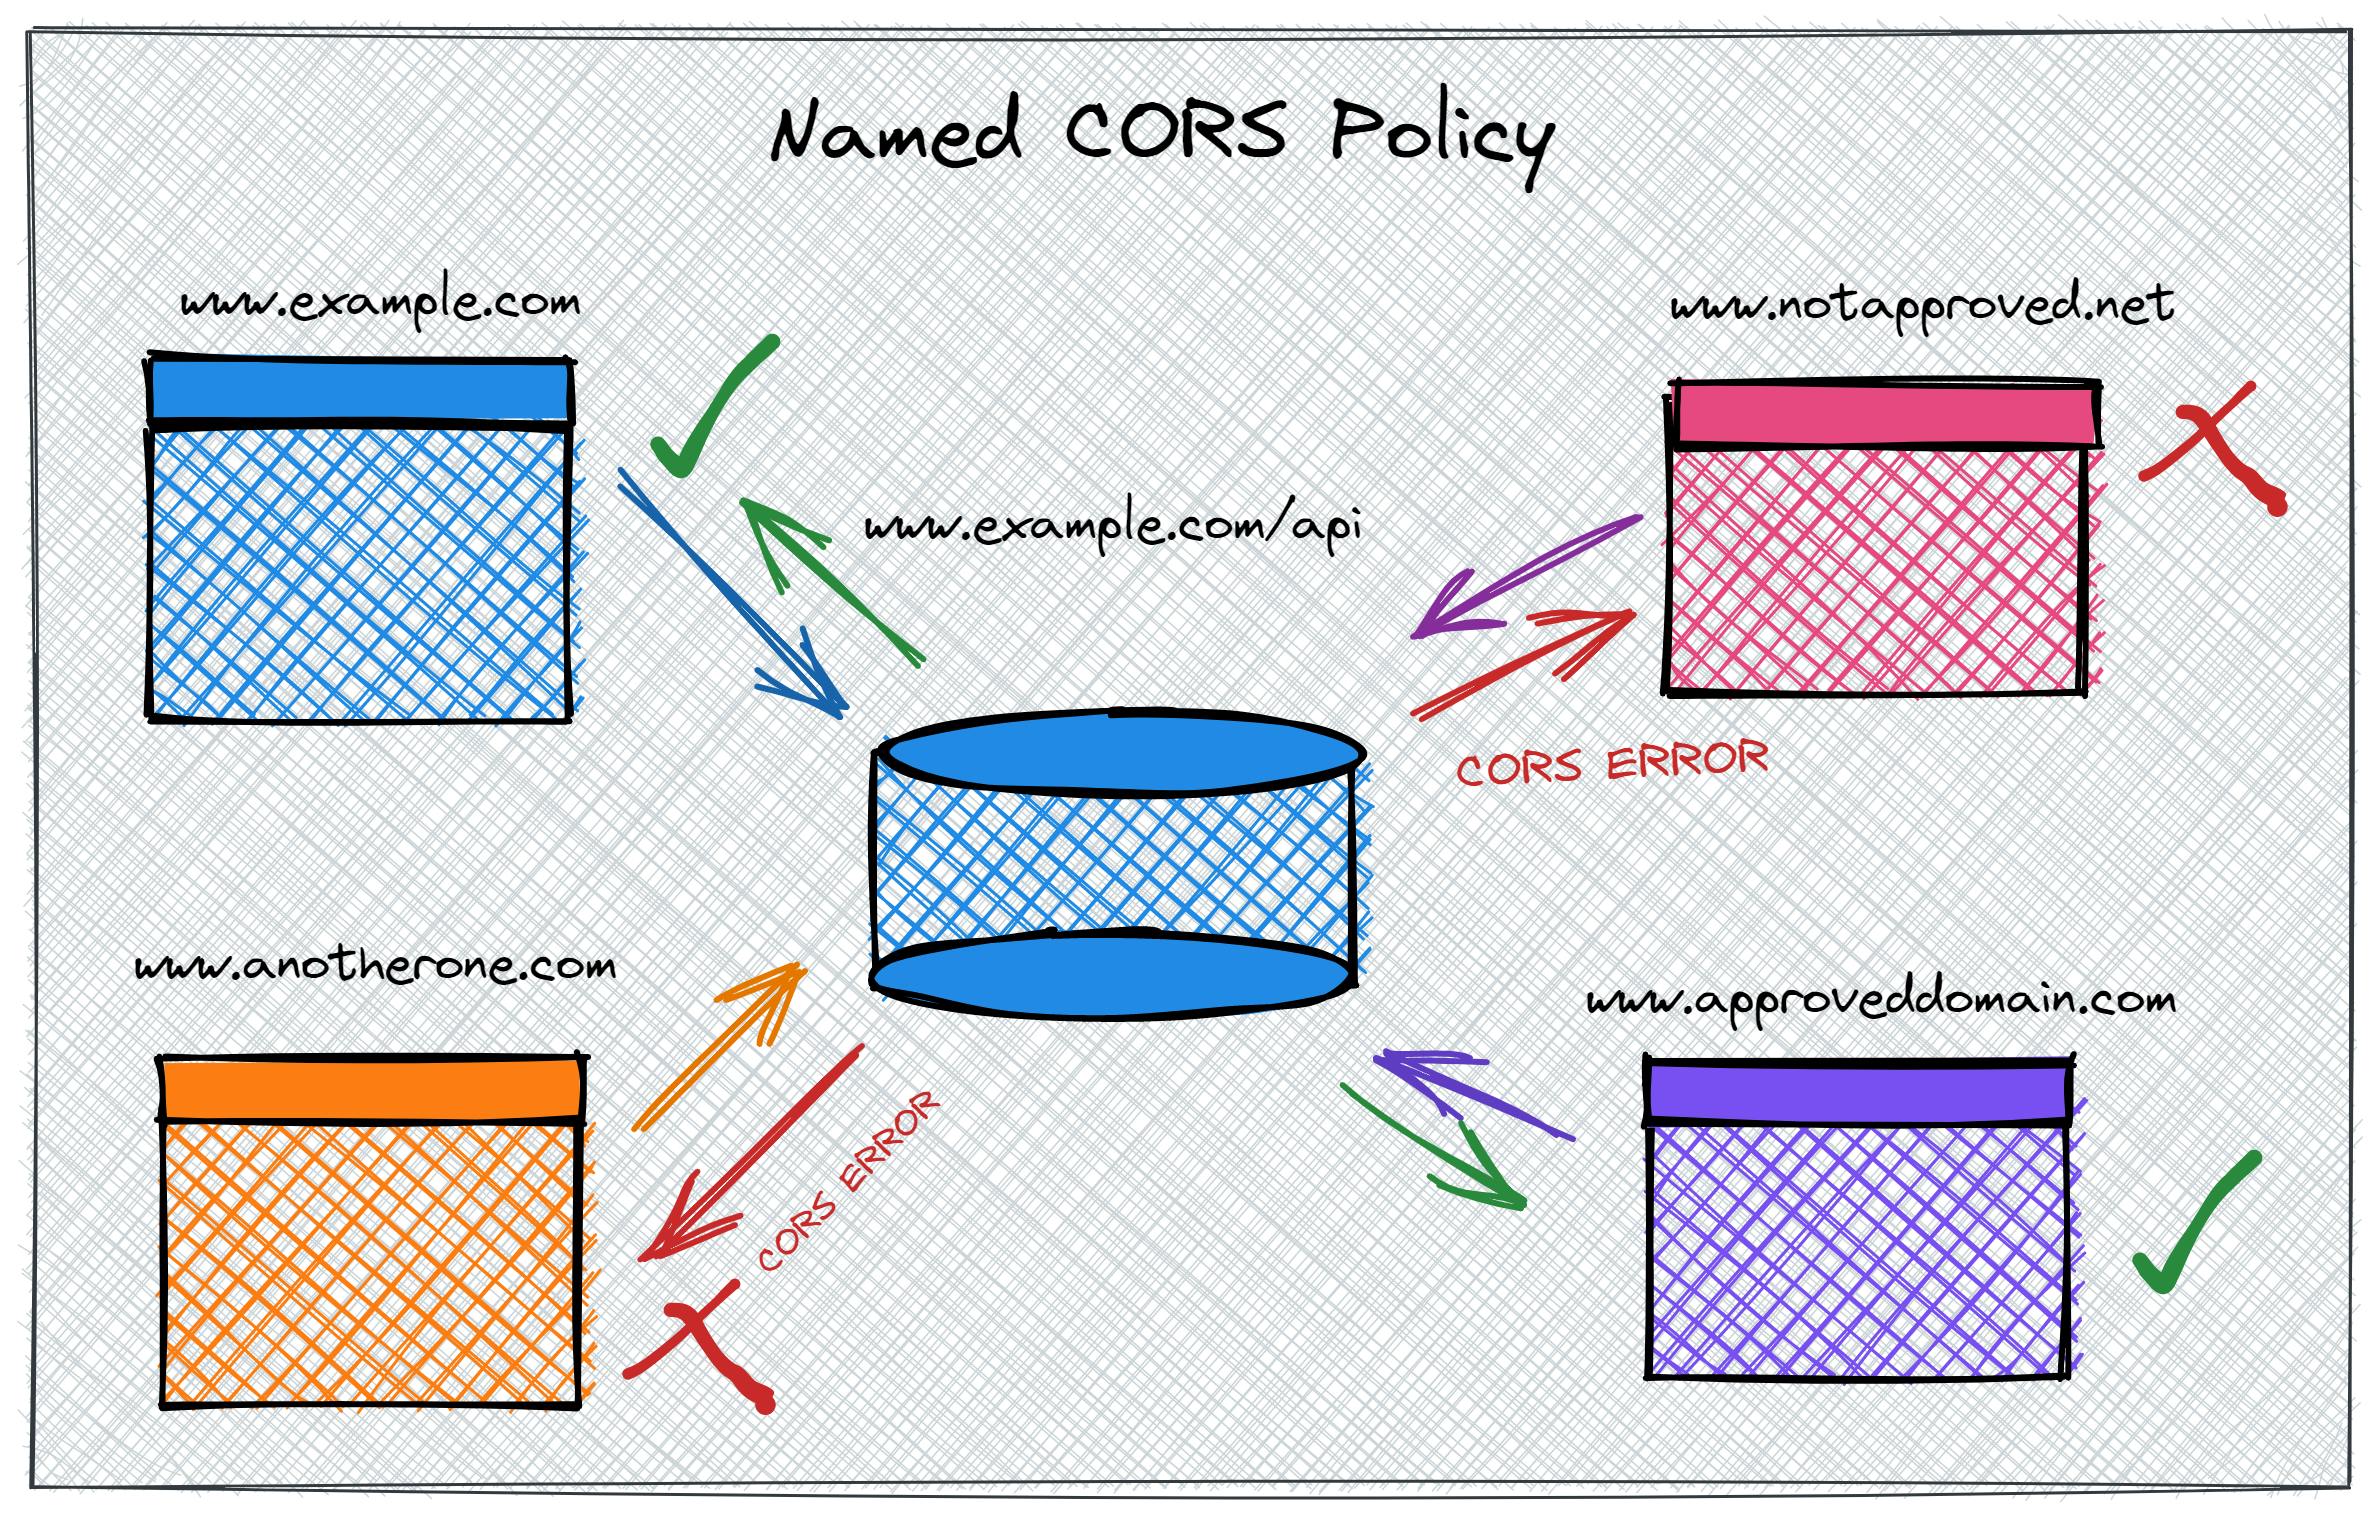 A diagram illustrating using a named CORS policy where some domains are explicitly allowed to make requests, while the default is that origins other than that of the API itself will be blocked.